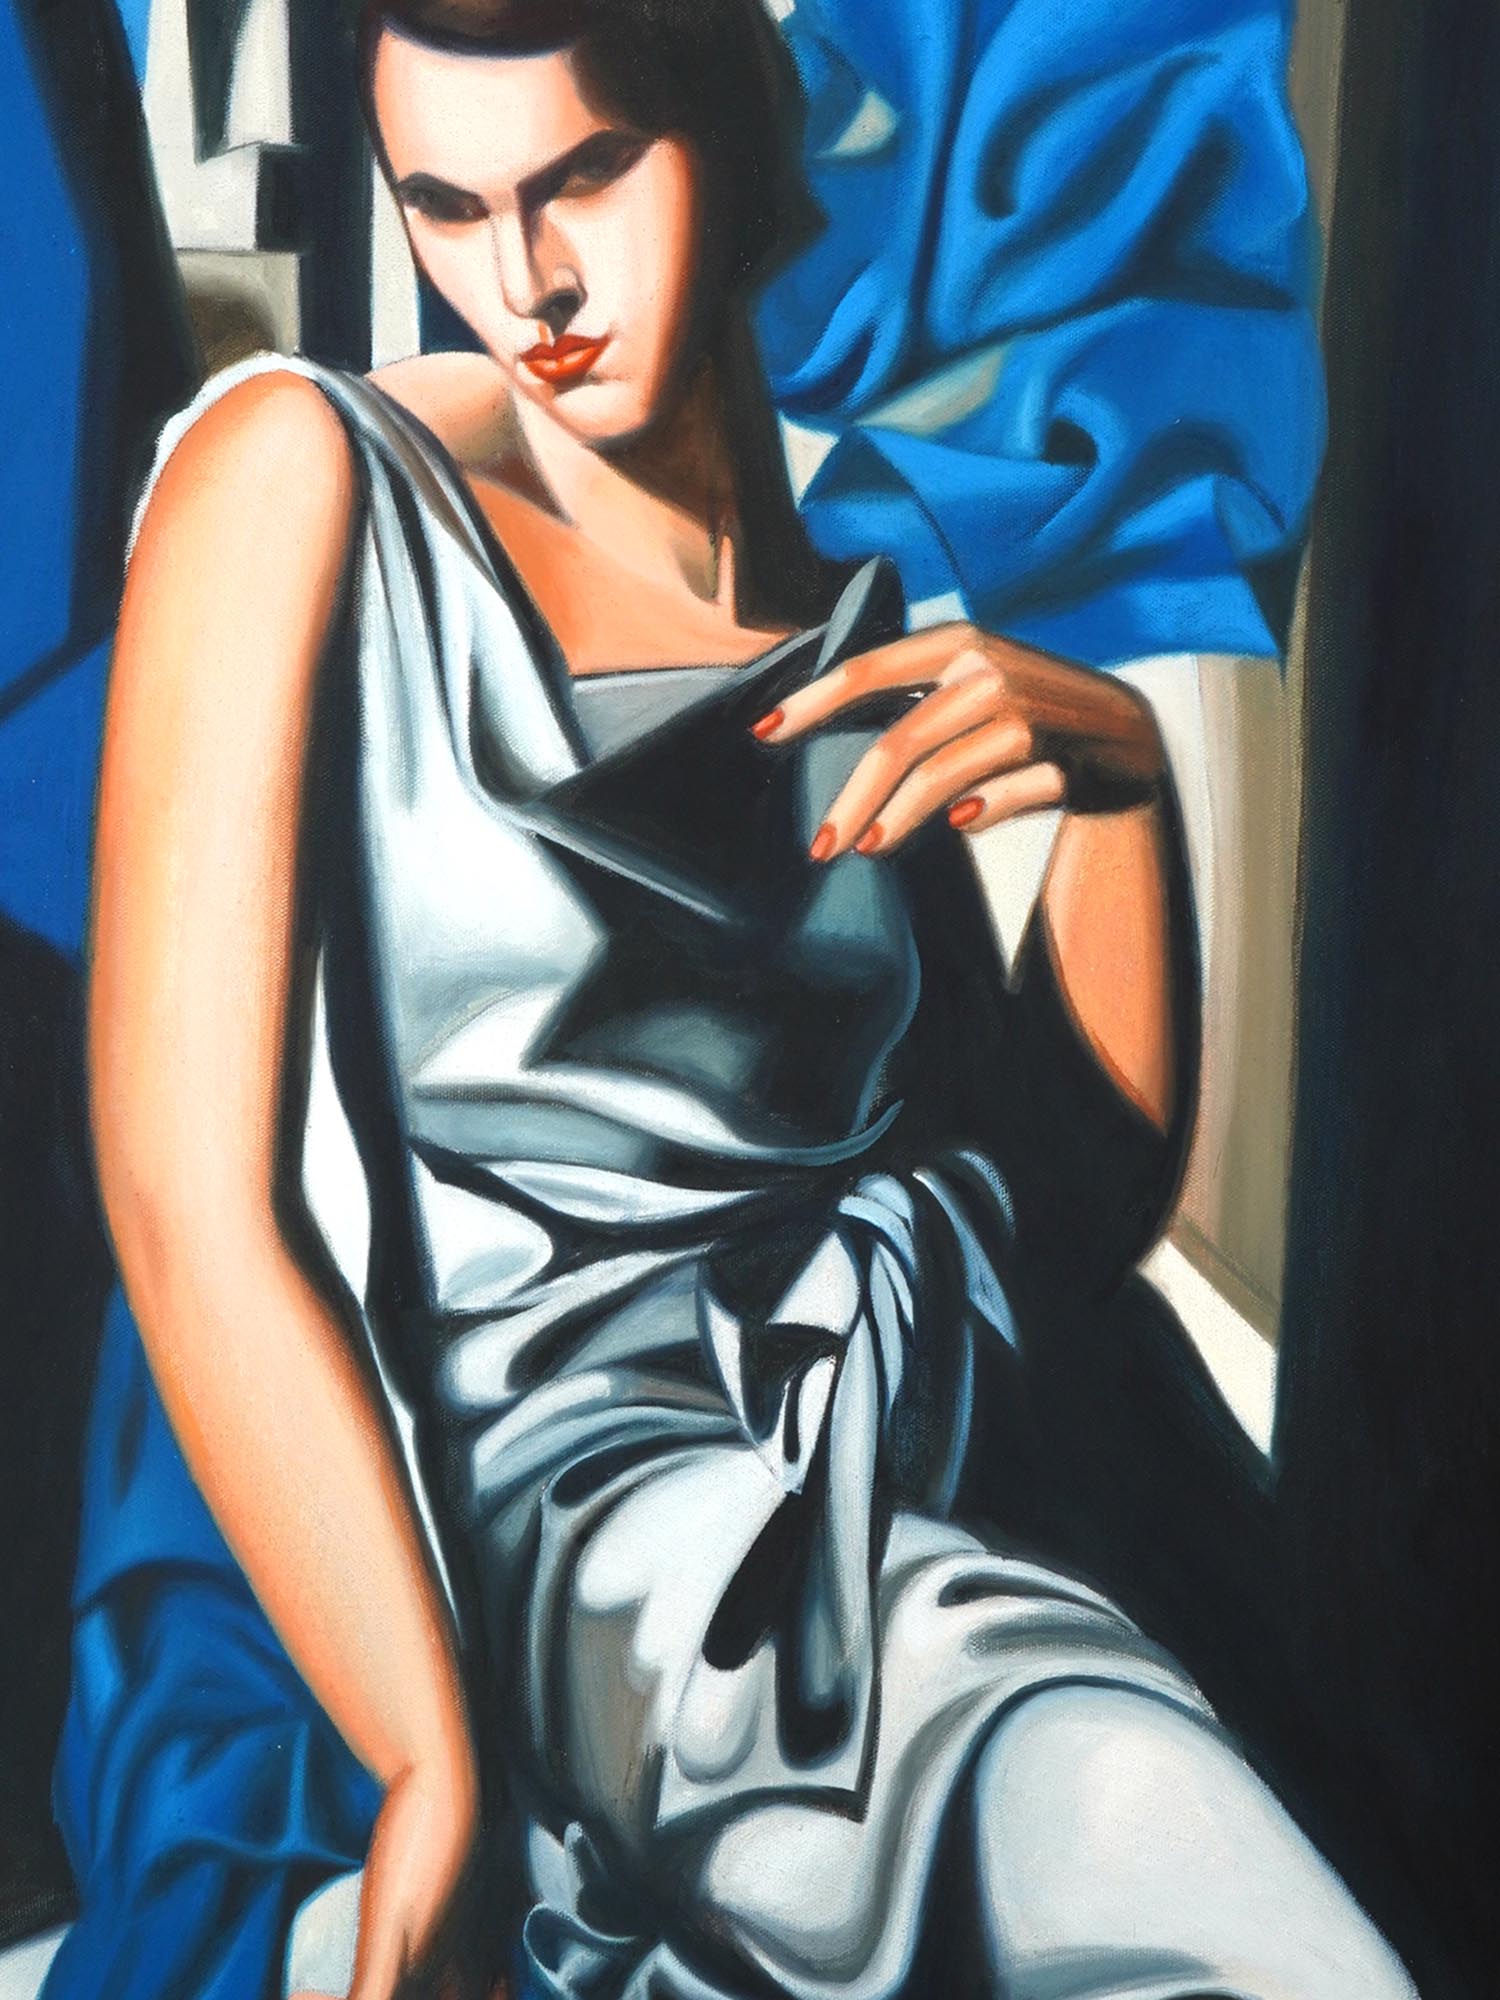 OIL PAINTING IN THE STYLE OF TAMARA DE LEMPICKA PIC-1